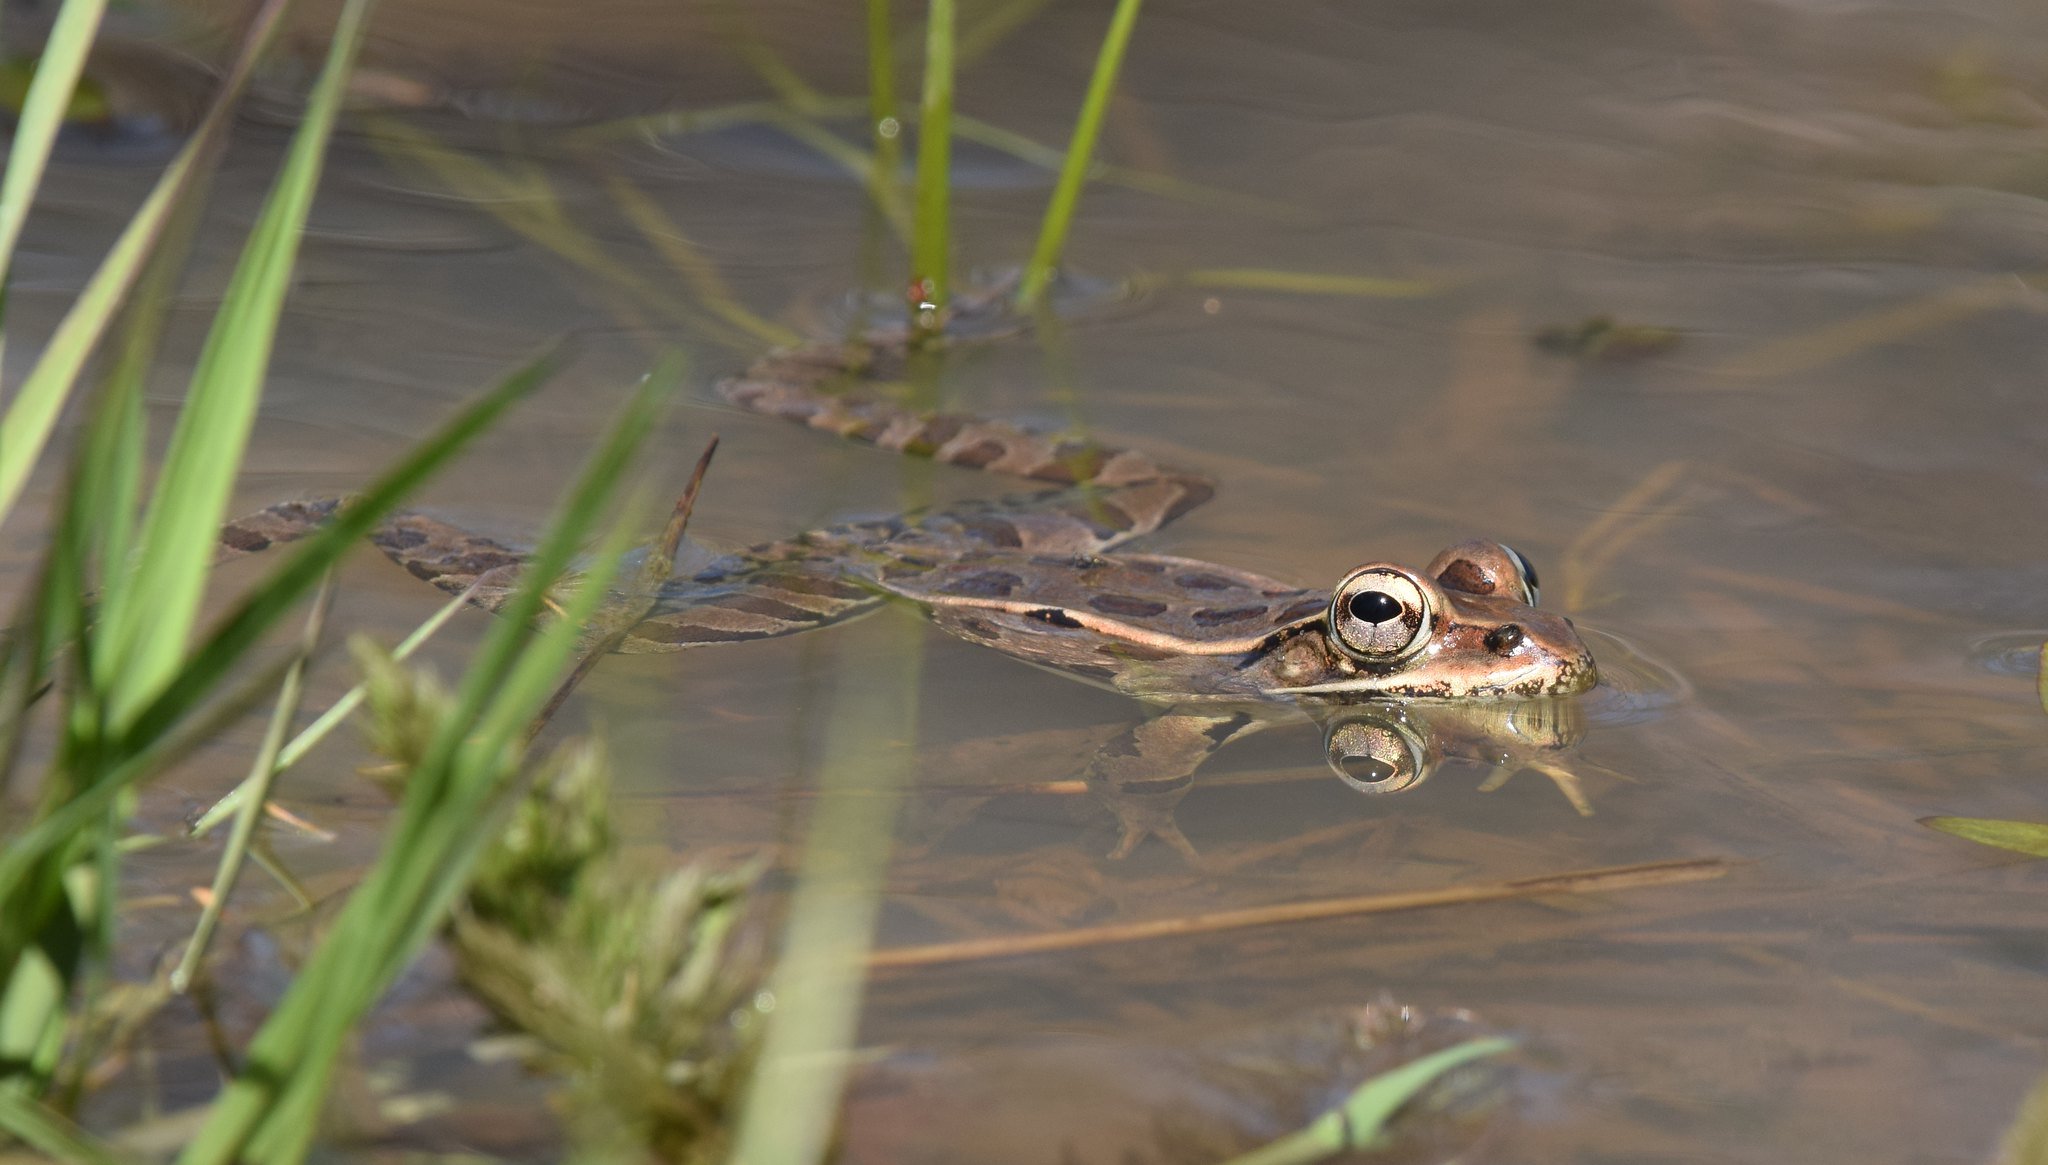 A Northern Leopard Frog swims in shallow waters.